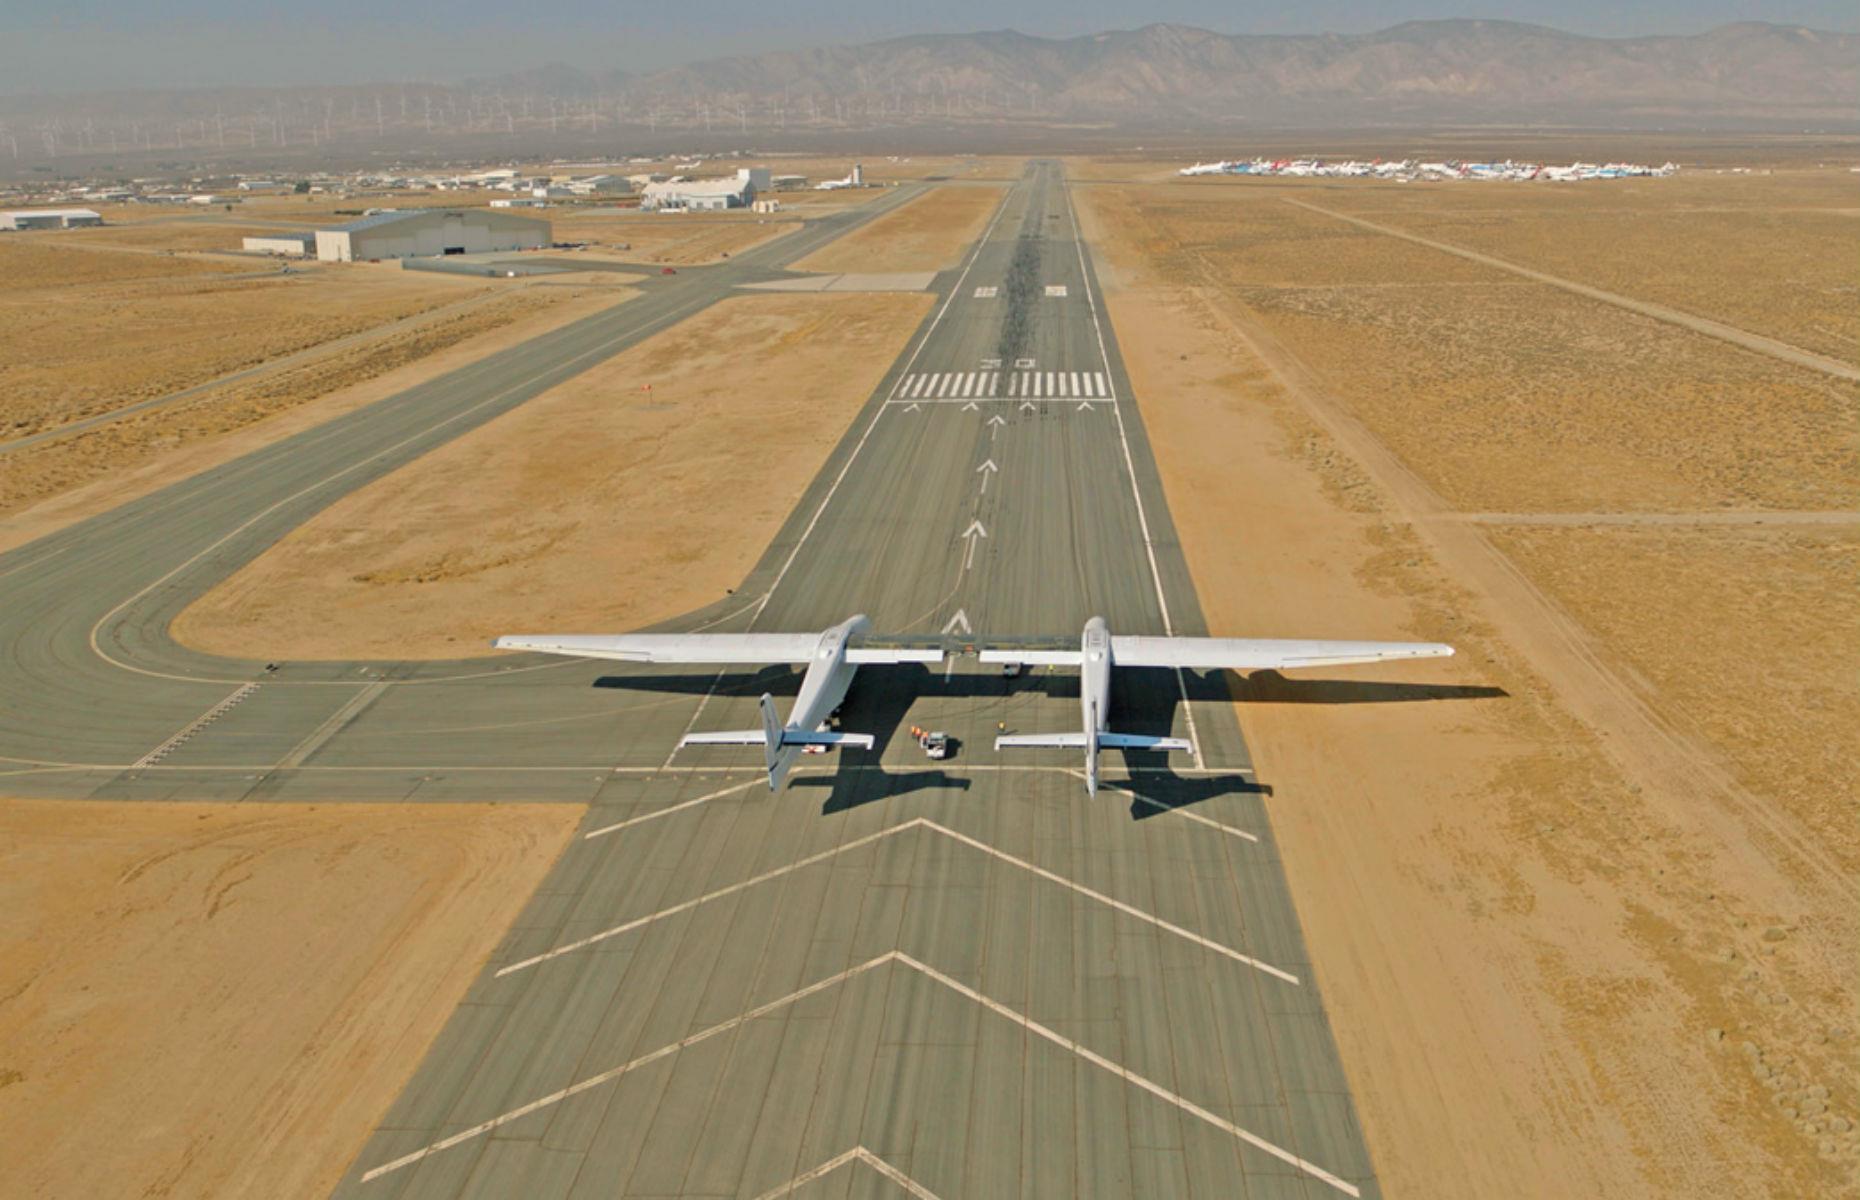 <p>The gigantic aircraft is designed to be a reusable air-launch platform. It should reduce the long wait times between constructing and launching satellites; give scientists the ability to launch rockets regardless of the weather; and significantly reduce the immense cost of sending rockets into space. Alongside its record-breaking wingspan, the 50-foot-tall (15m), 238-foot-long (73m) plane is also powered by six turbofan engines, has 28 wheels and two cockpits, and boasts a payload capacity of more than 226,800kg.</p>